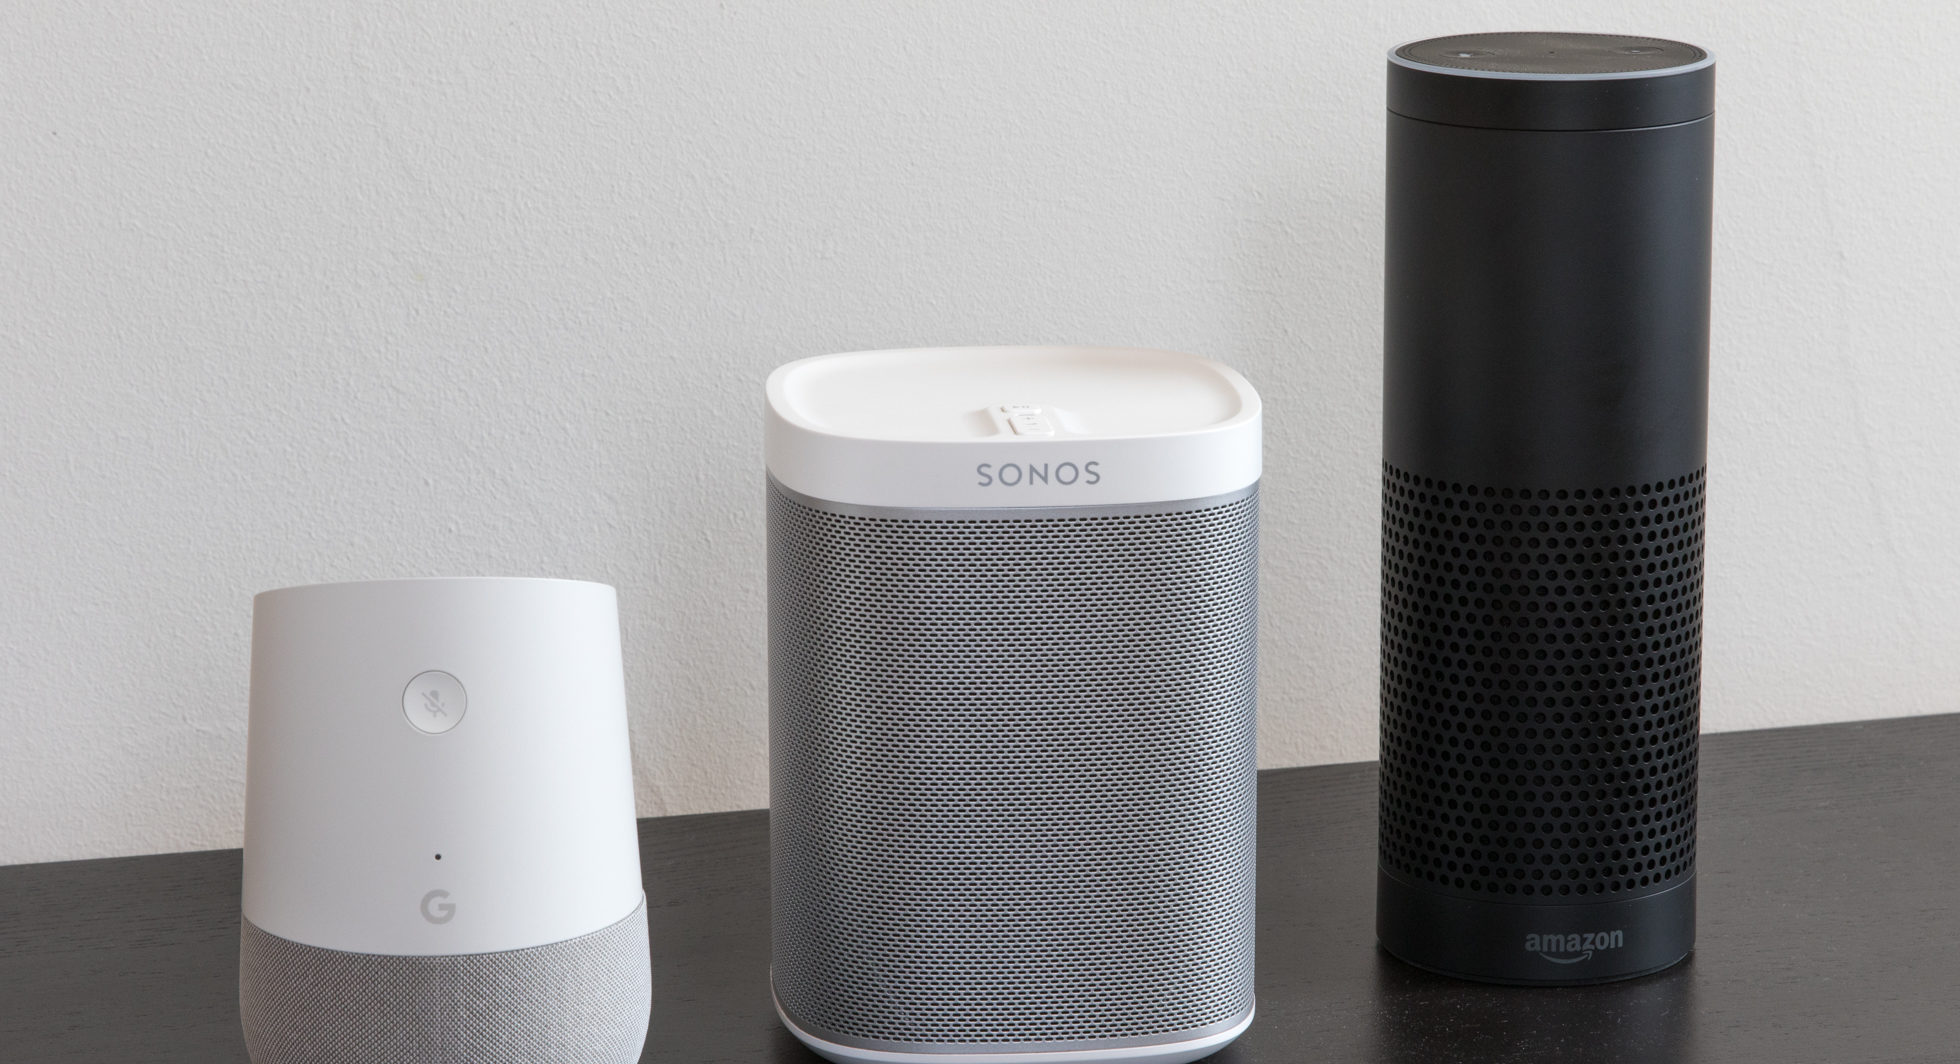 Smart speakers, such as those from Google, Sonos, and Amazon shown here, can be welcome participants in your connected home. But keep them updated with the latest security patches. Image: Digitized House Media.